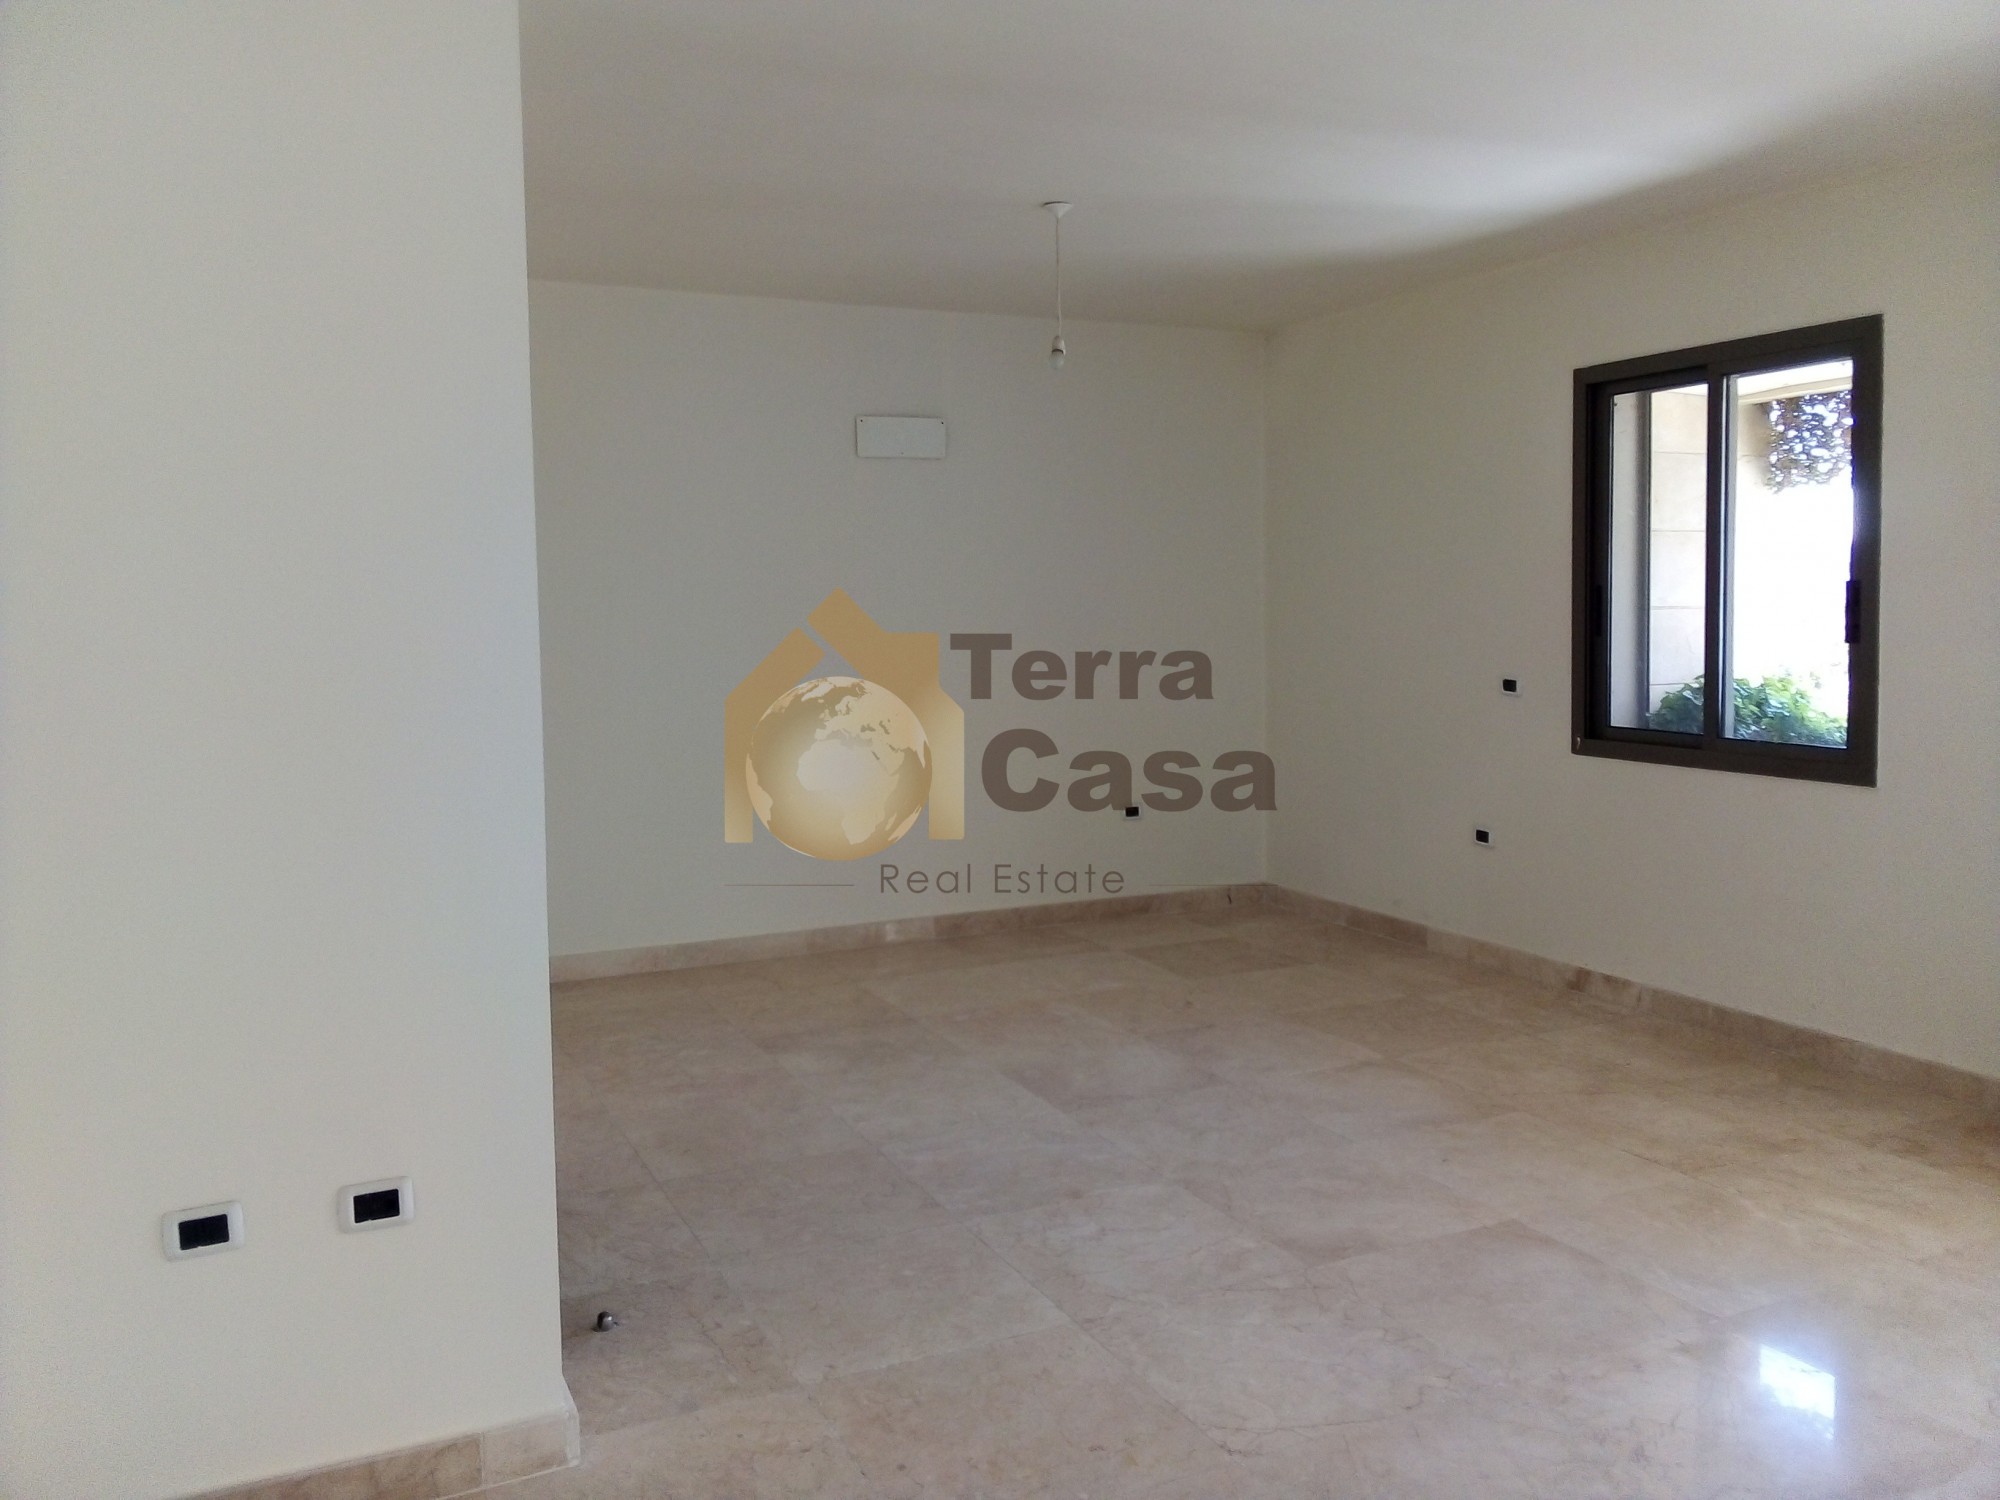 Apartment for sale in chtaura brand new luxurious finishing.